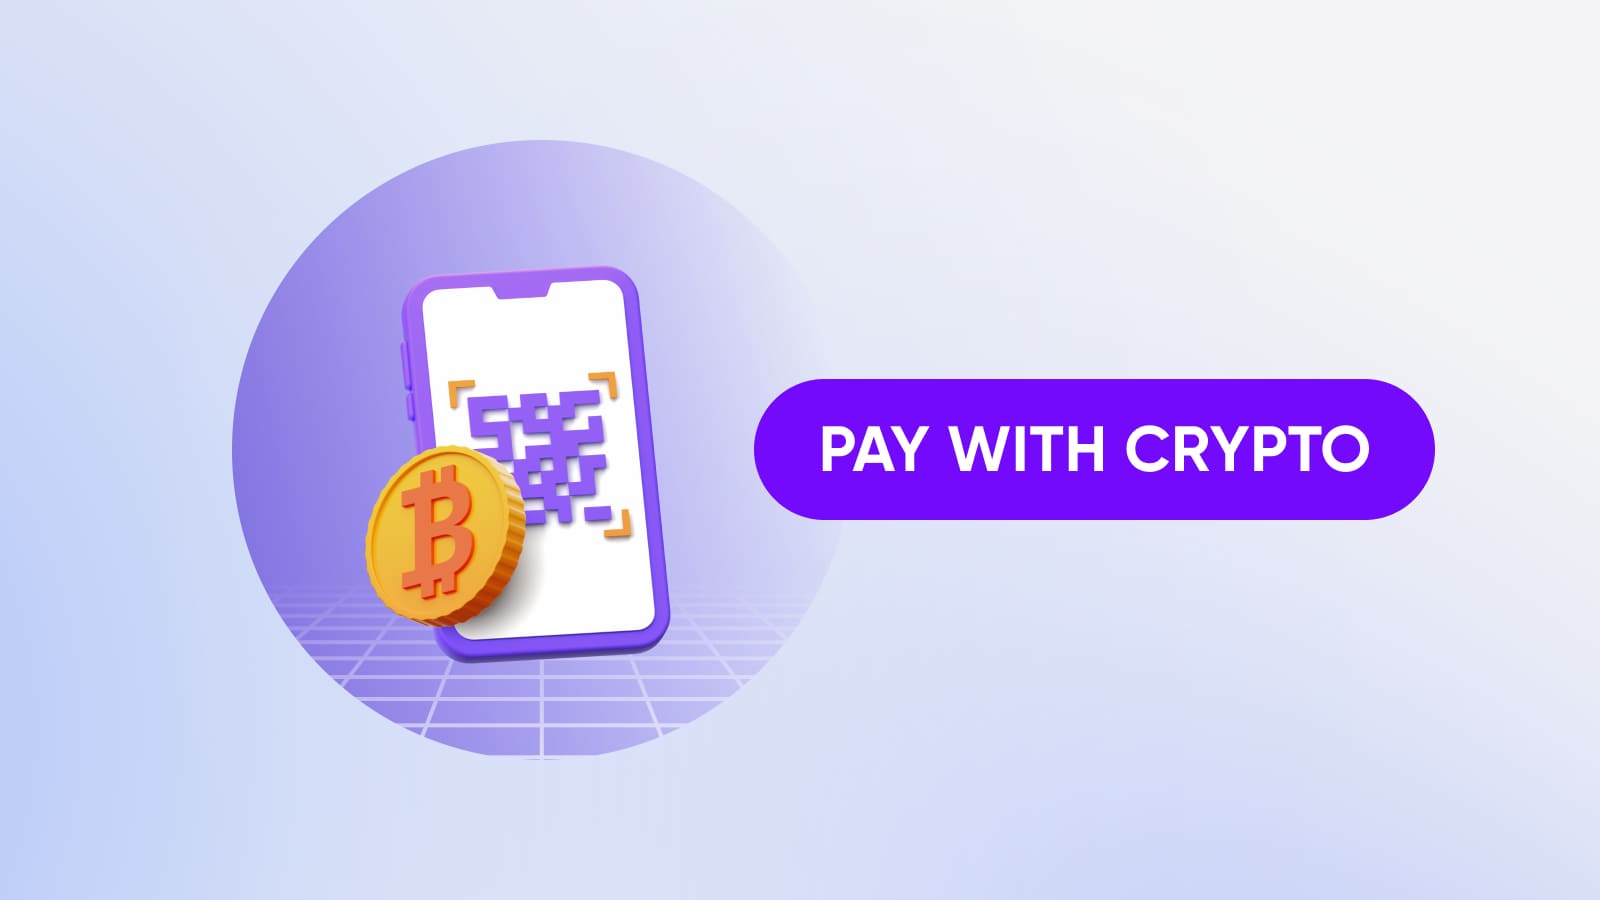 Cryptocurrency payment processing works with payments in cryptocurrency instead of fiat money.